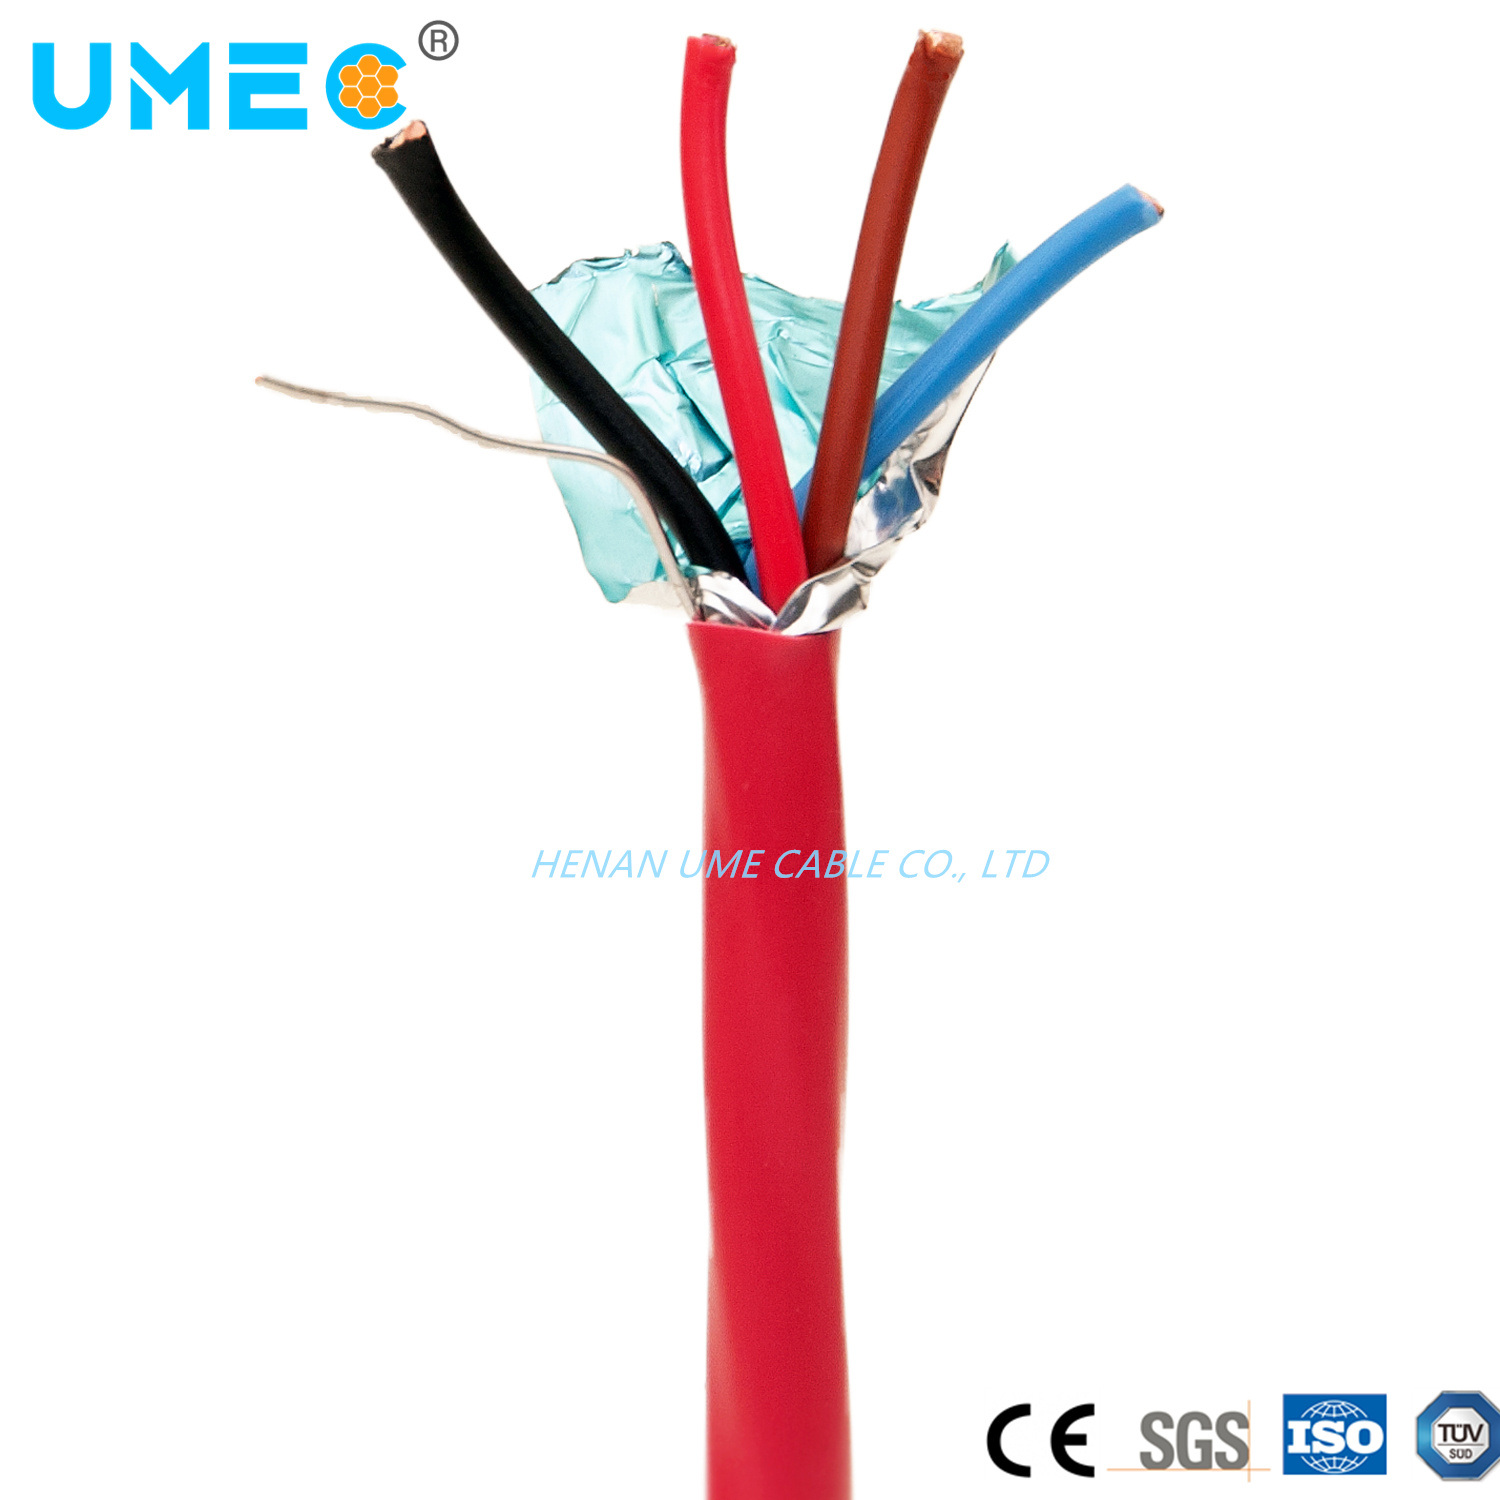 IEC Approval Fire Alarm Cable 2X1.5mm2 Shielded Fire Resistant Cable